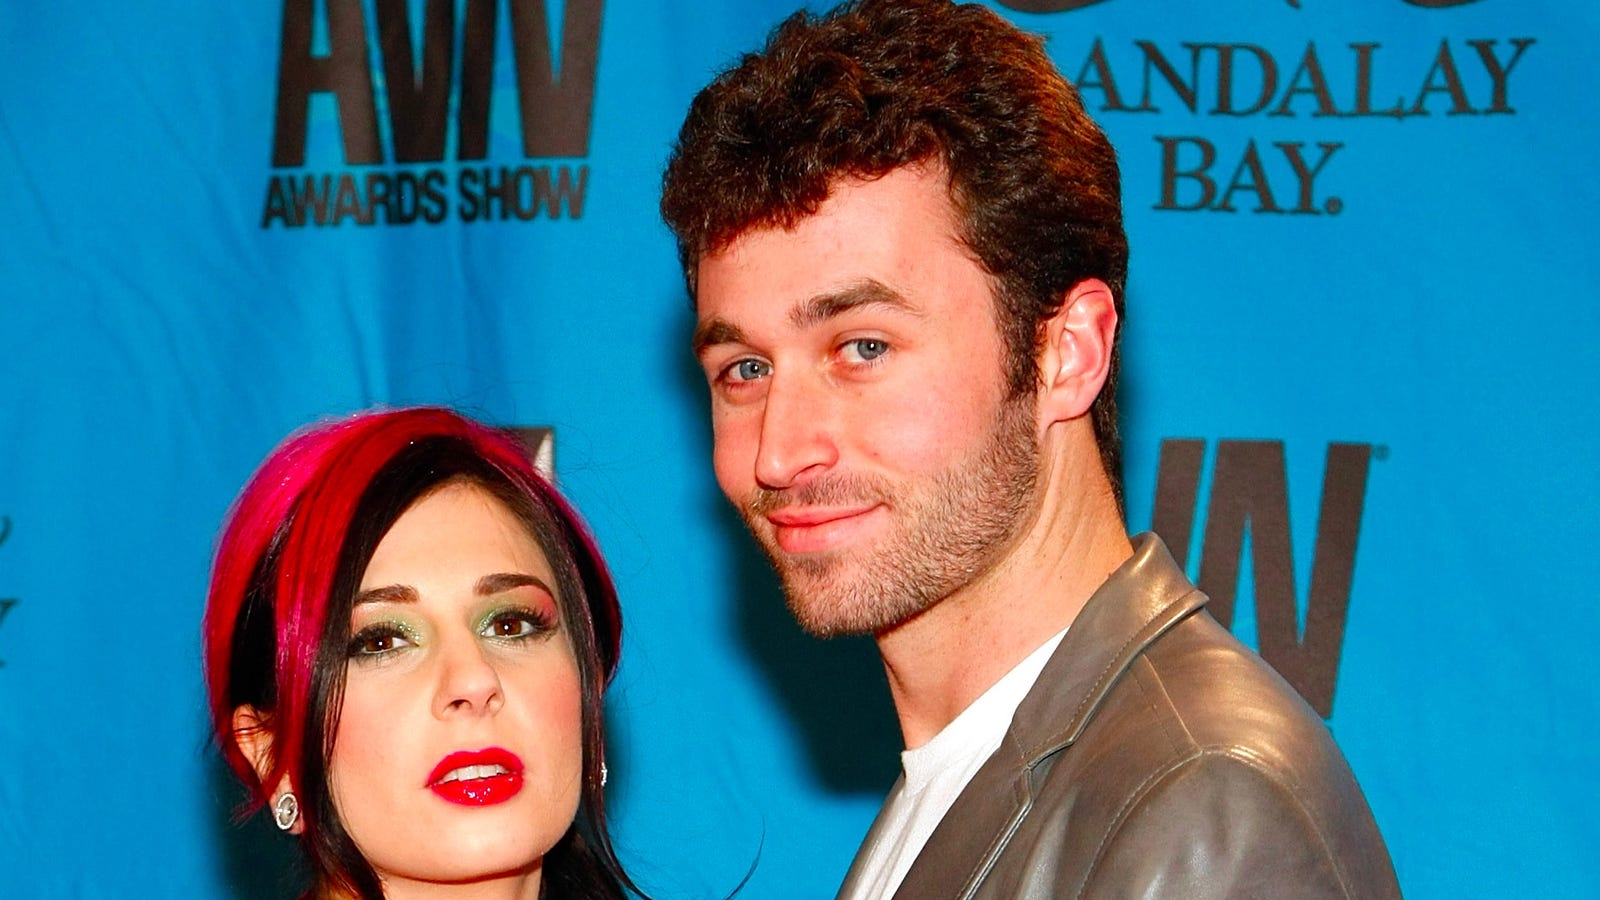 Avn Distances Themselves From James Deen And His Avn Award Nominations 4028